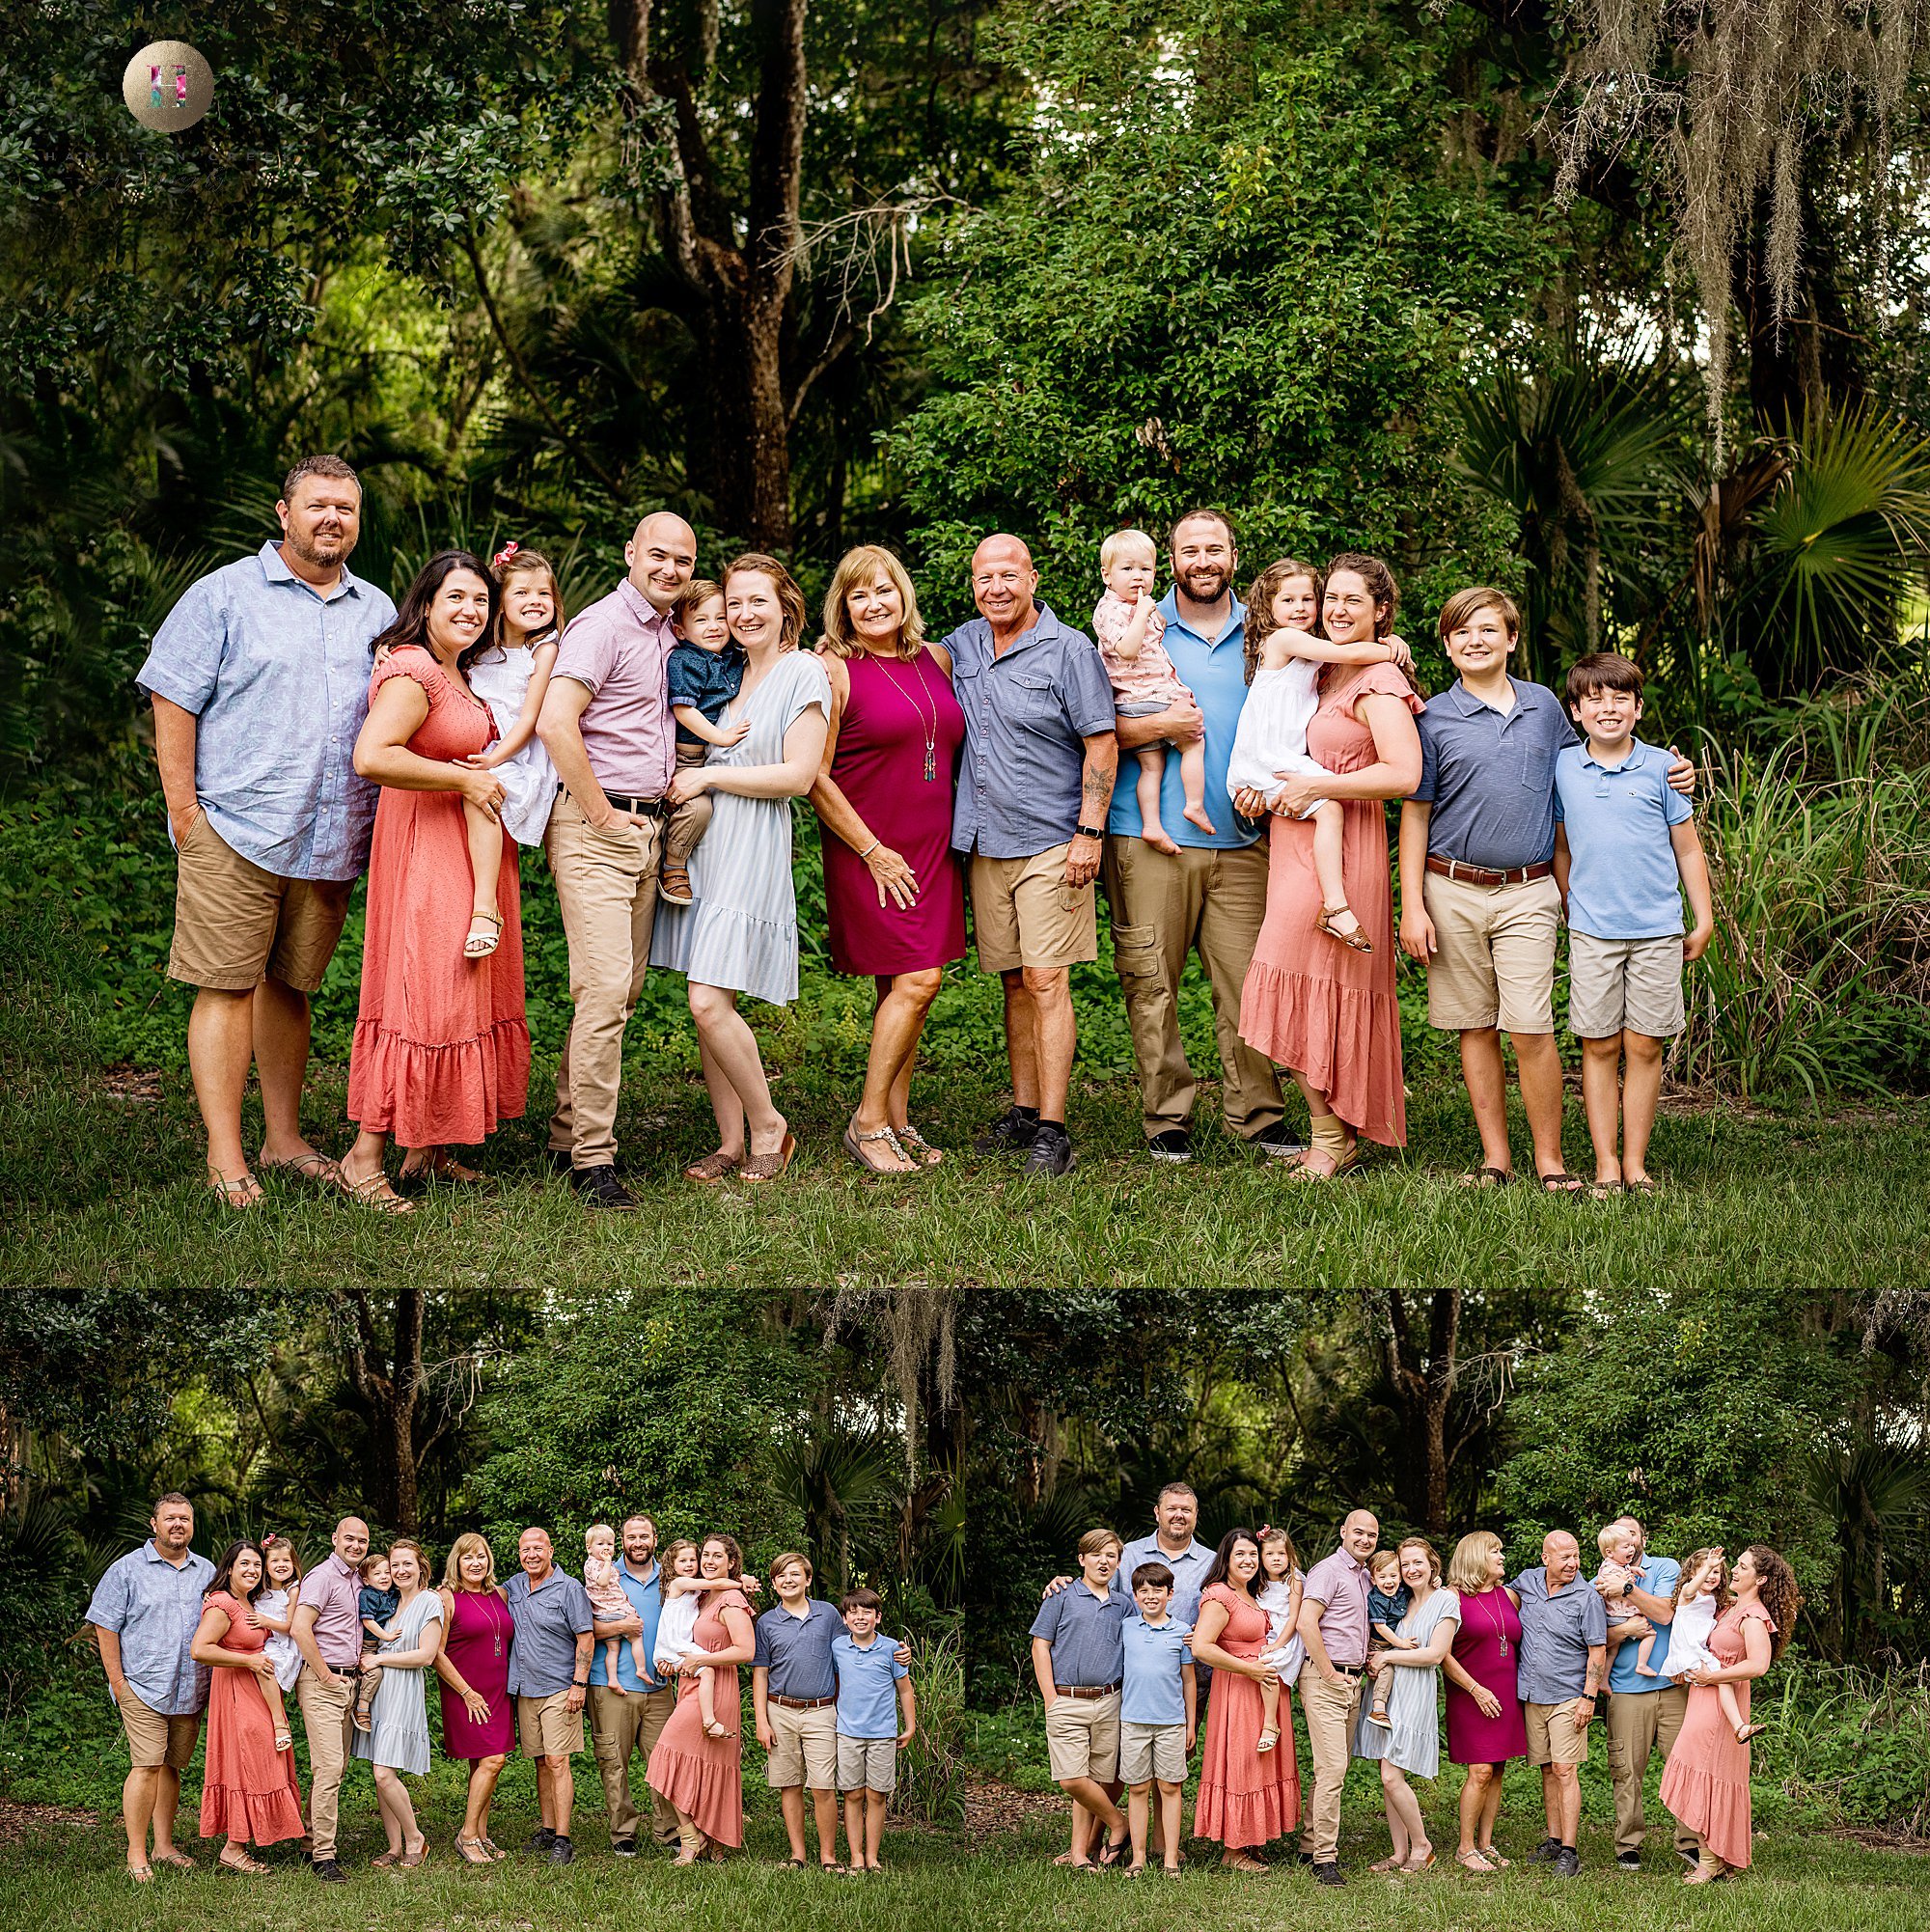 8 Simple Group Photography Portrait Tips to Copy And Look Like a Pro